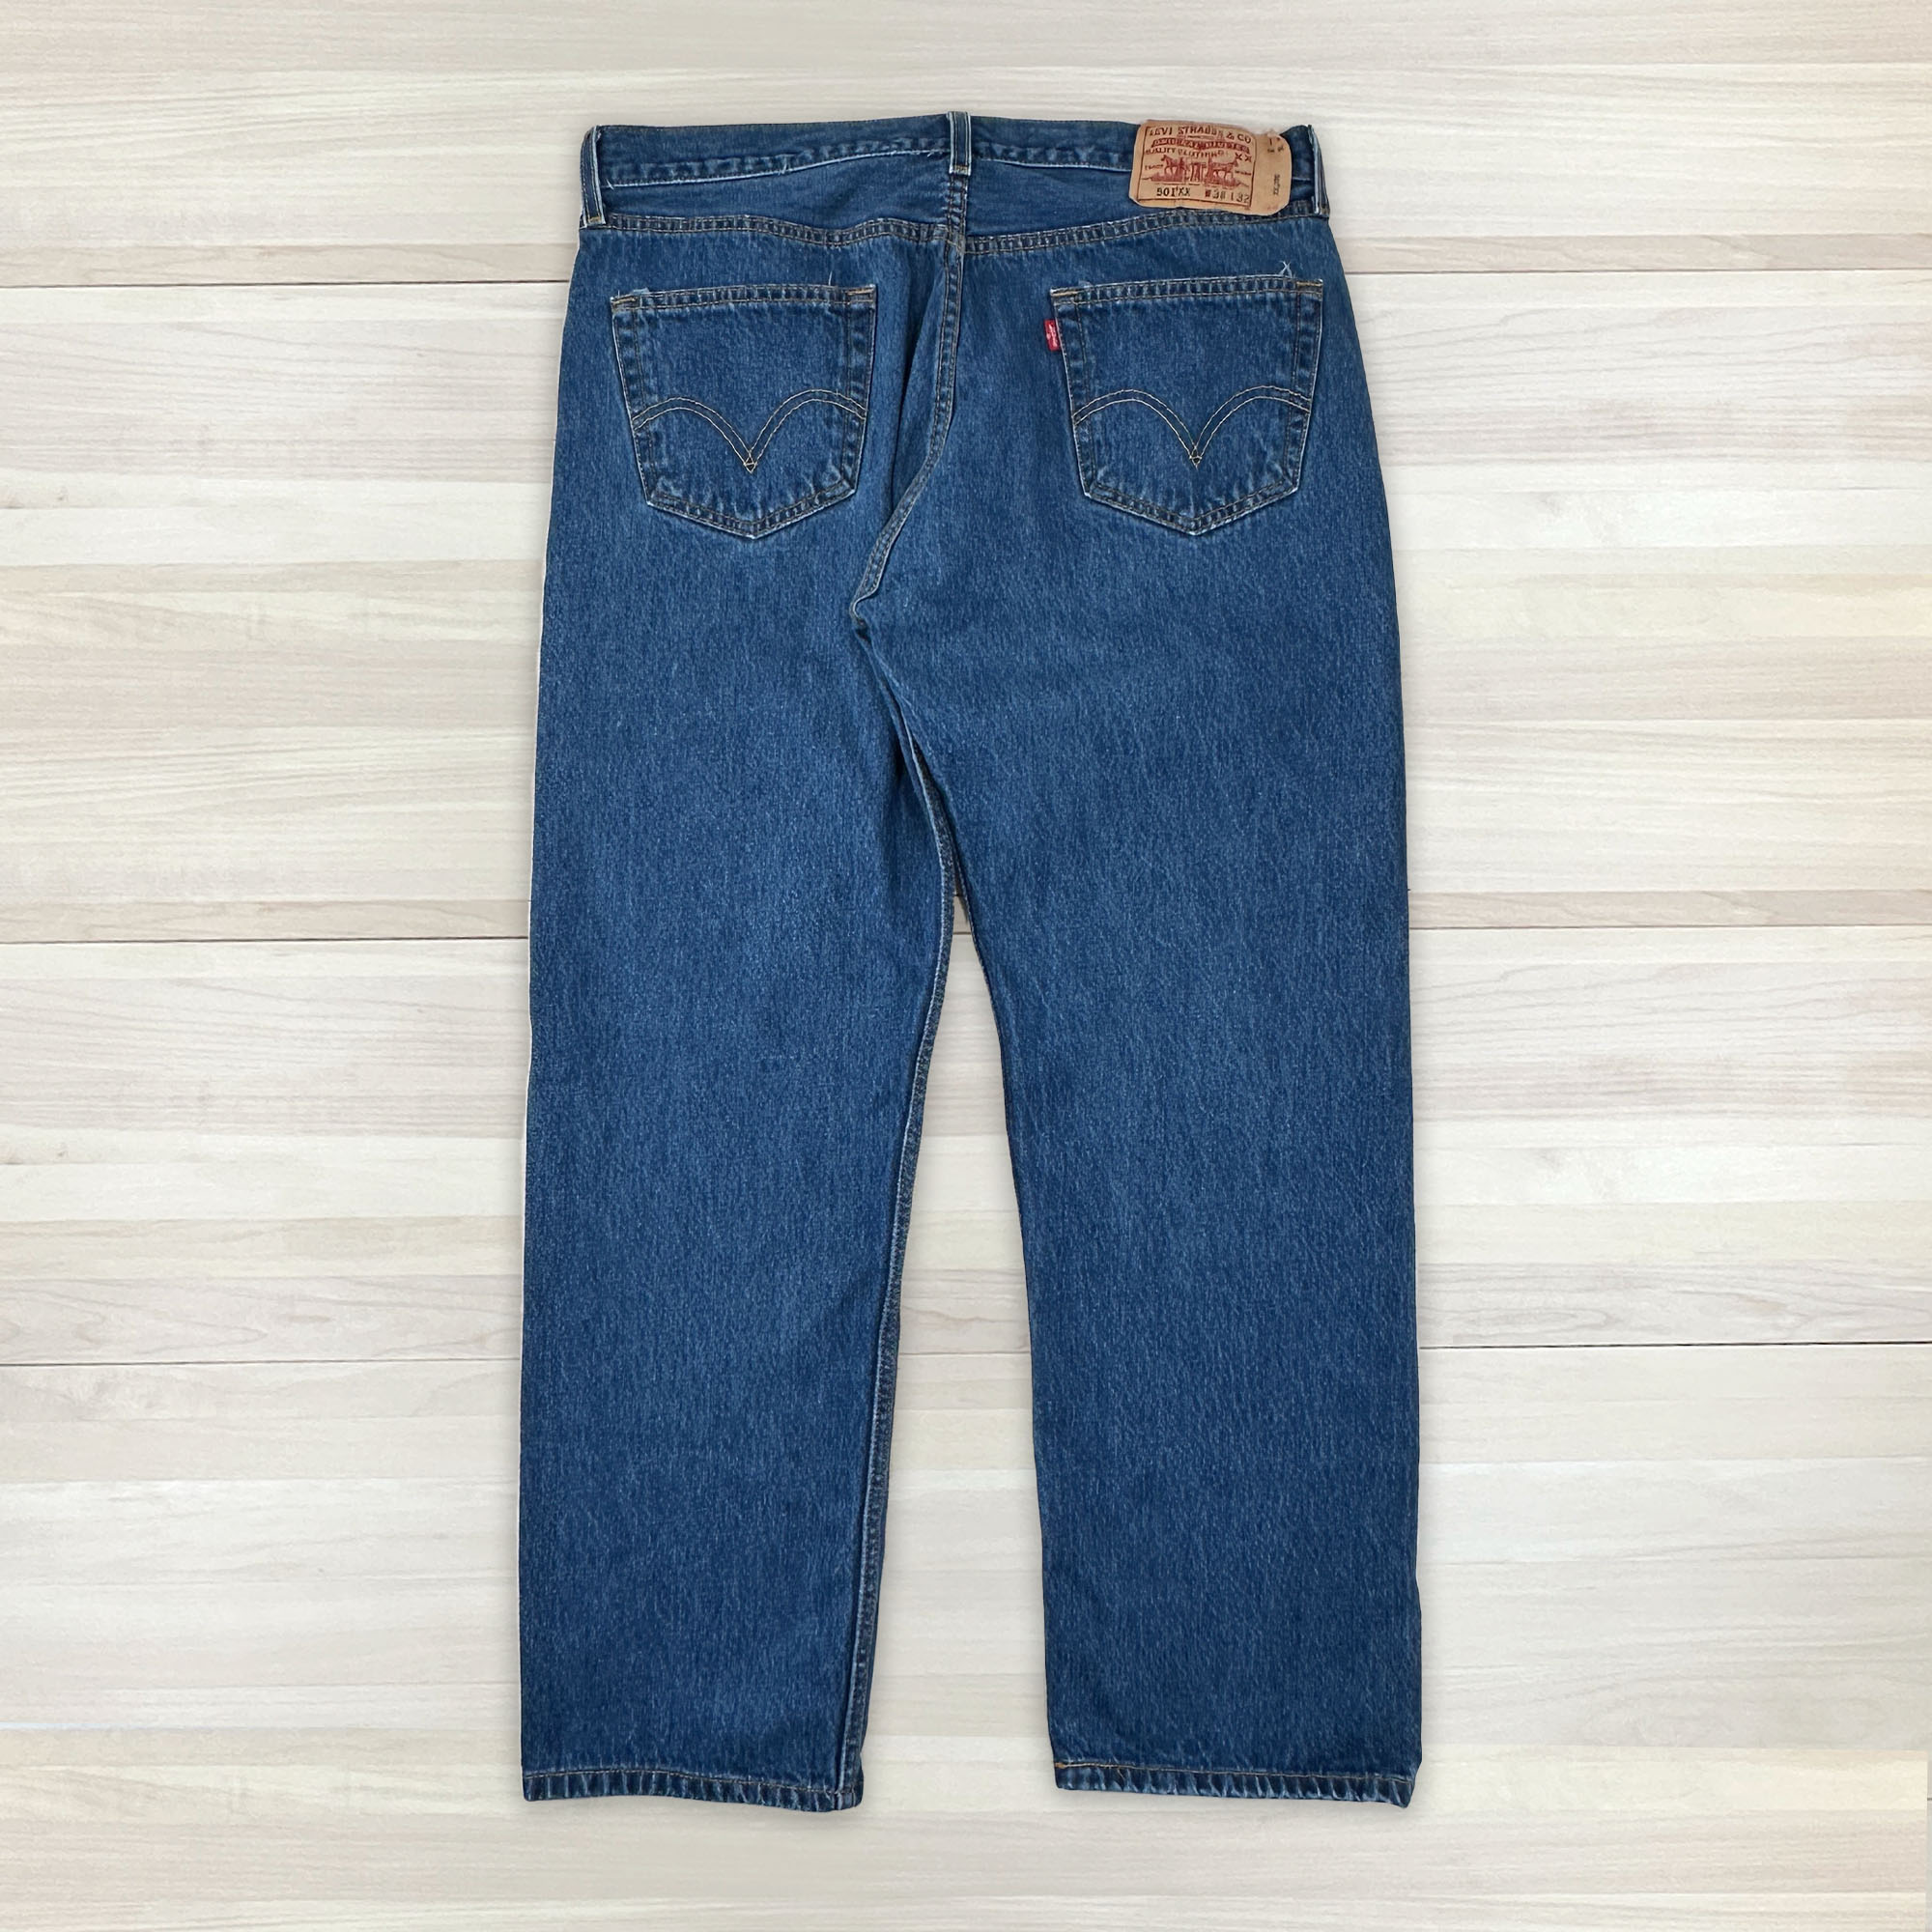 Men's Levi's 501xx Straight Leg Jeans - Tagged 38x32 / Measures: 35x30 Great Lakes Reclaimed Denim